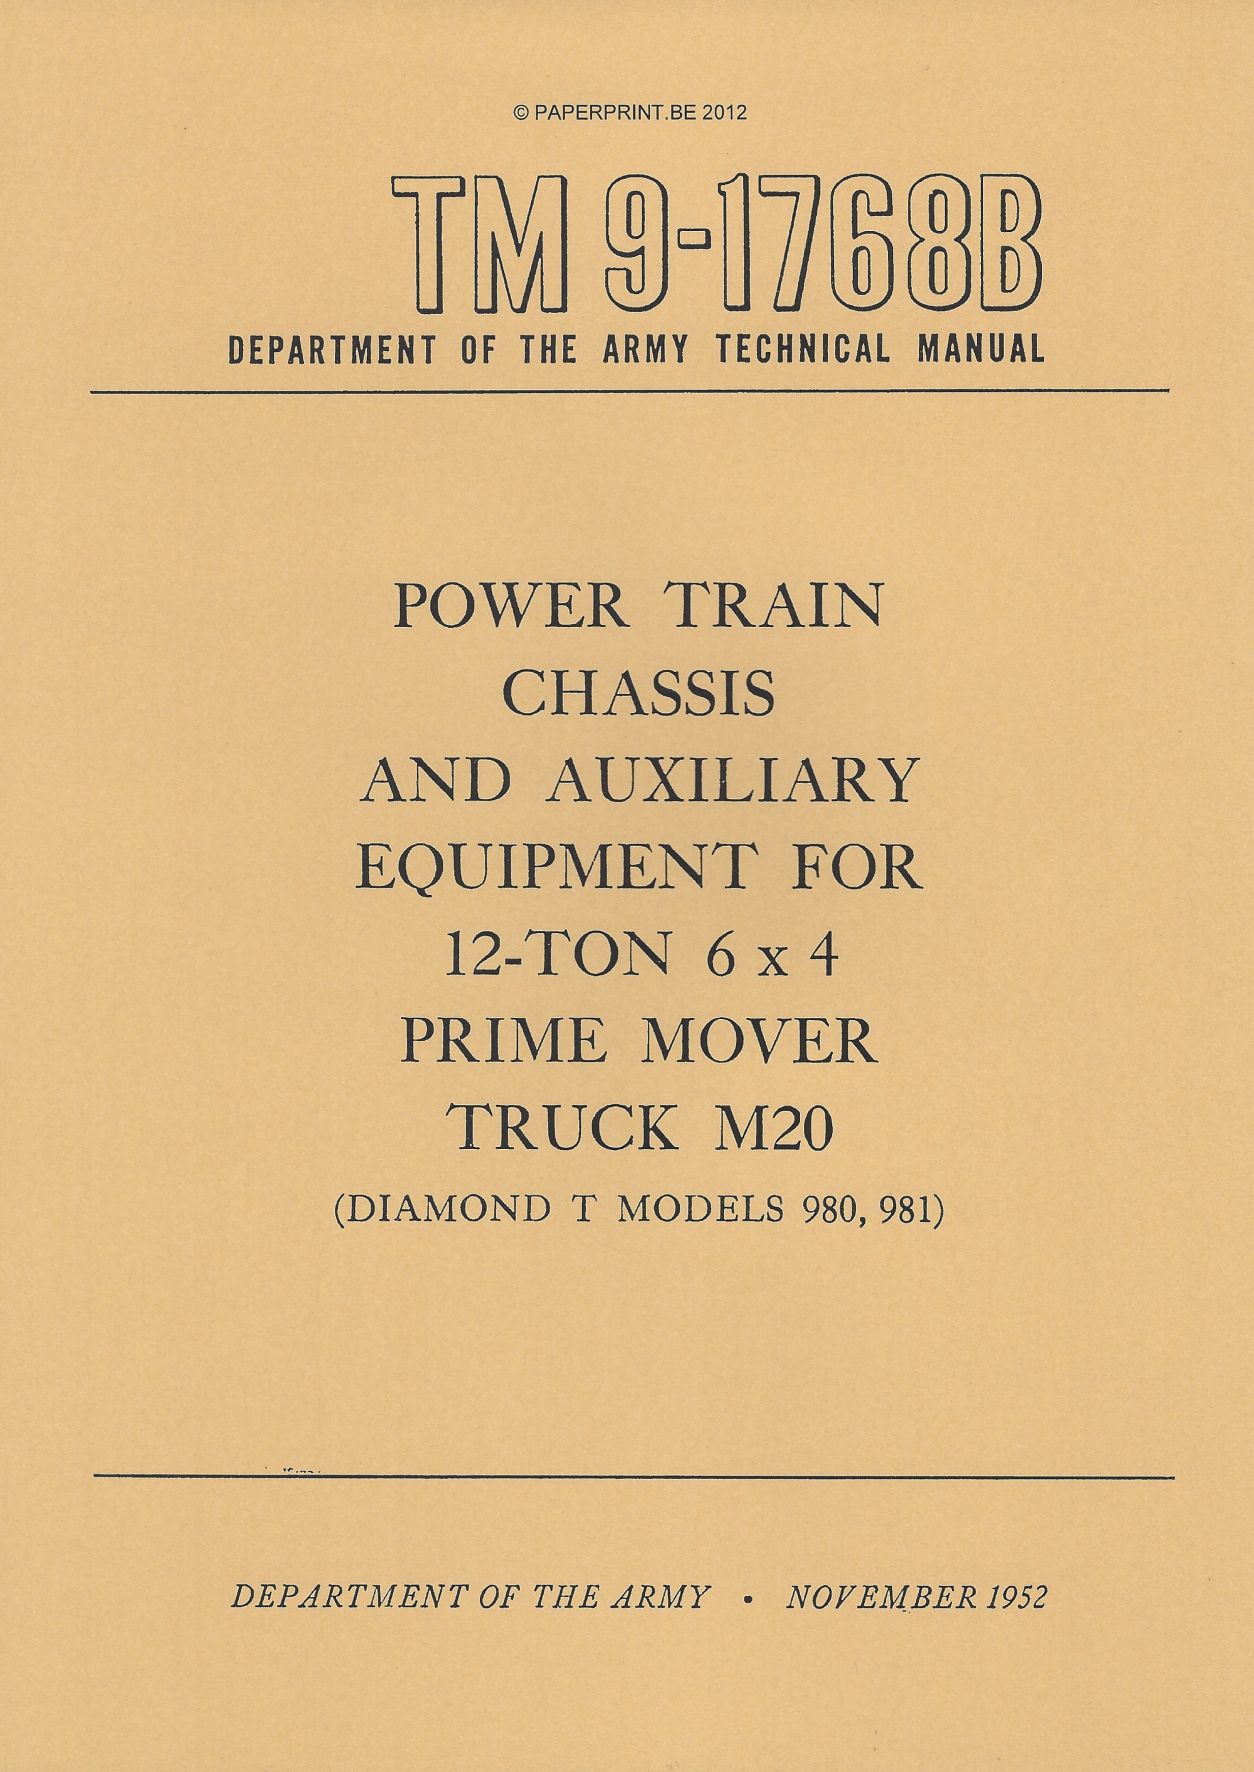 TM 9-1768B US POWER TRAIN, CHASSIS AND AUXILIARY  EQUIPMENT FOR 12-TON 6x4 PRIME MOVER TRUCK M20  (DIAMOND T MODELS 980, 981)